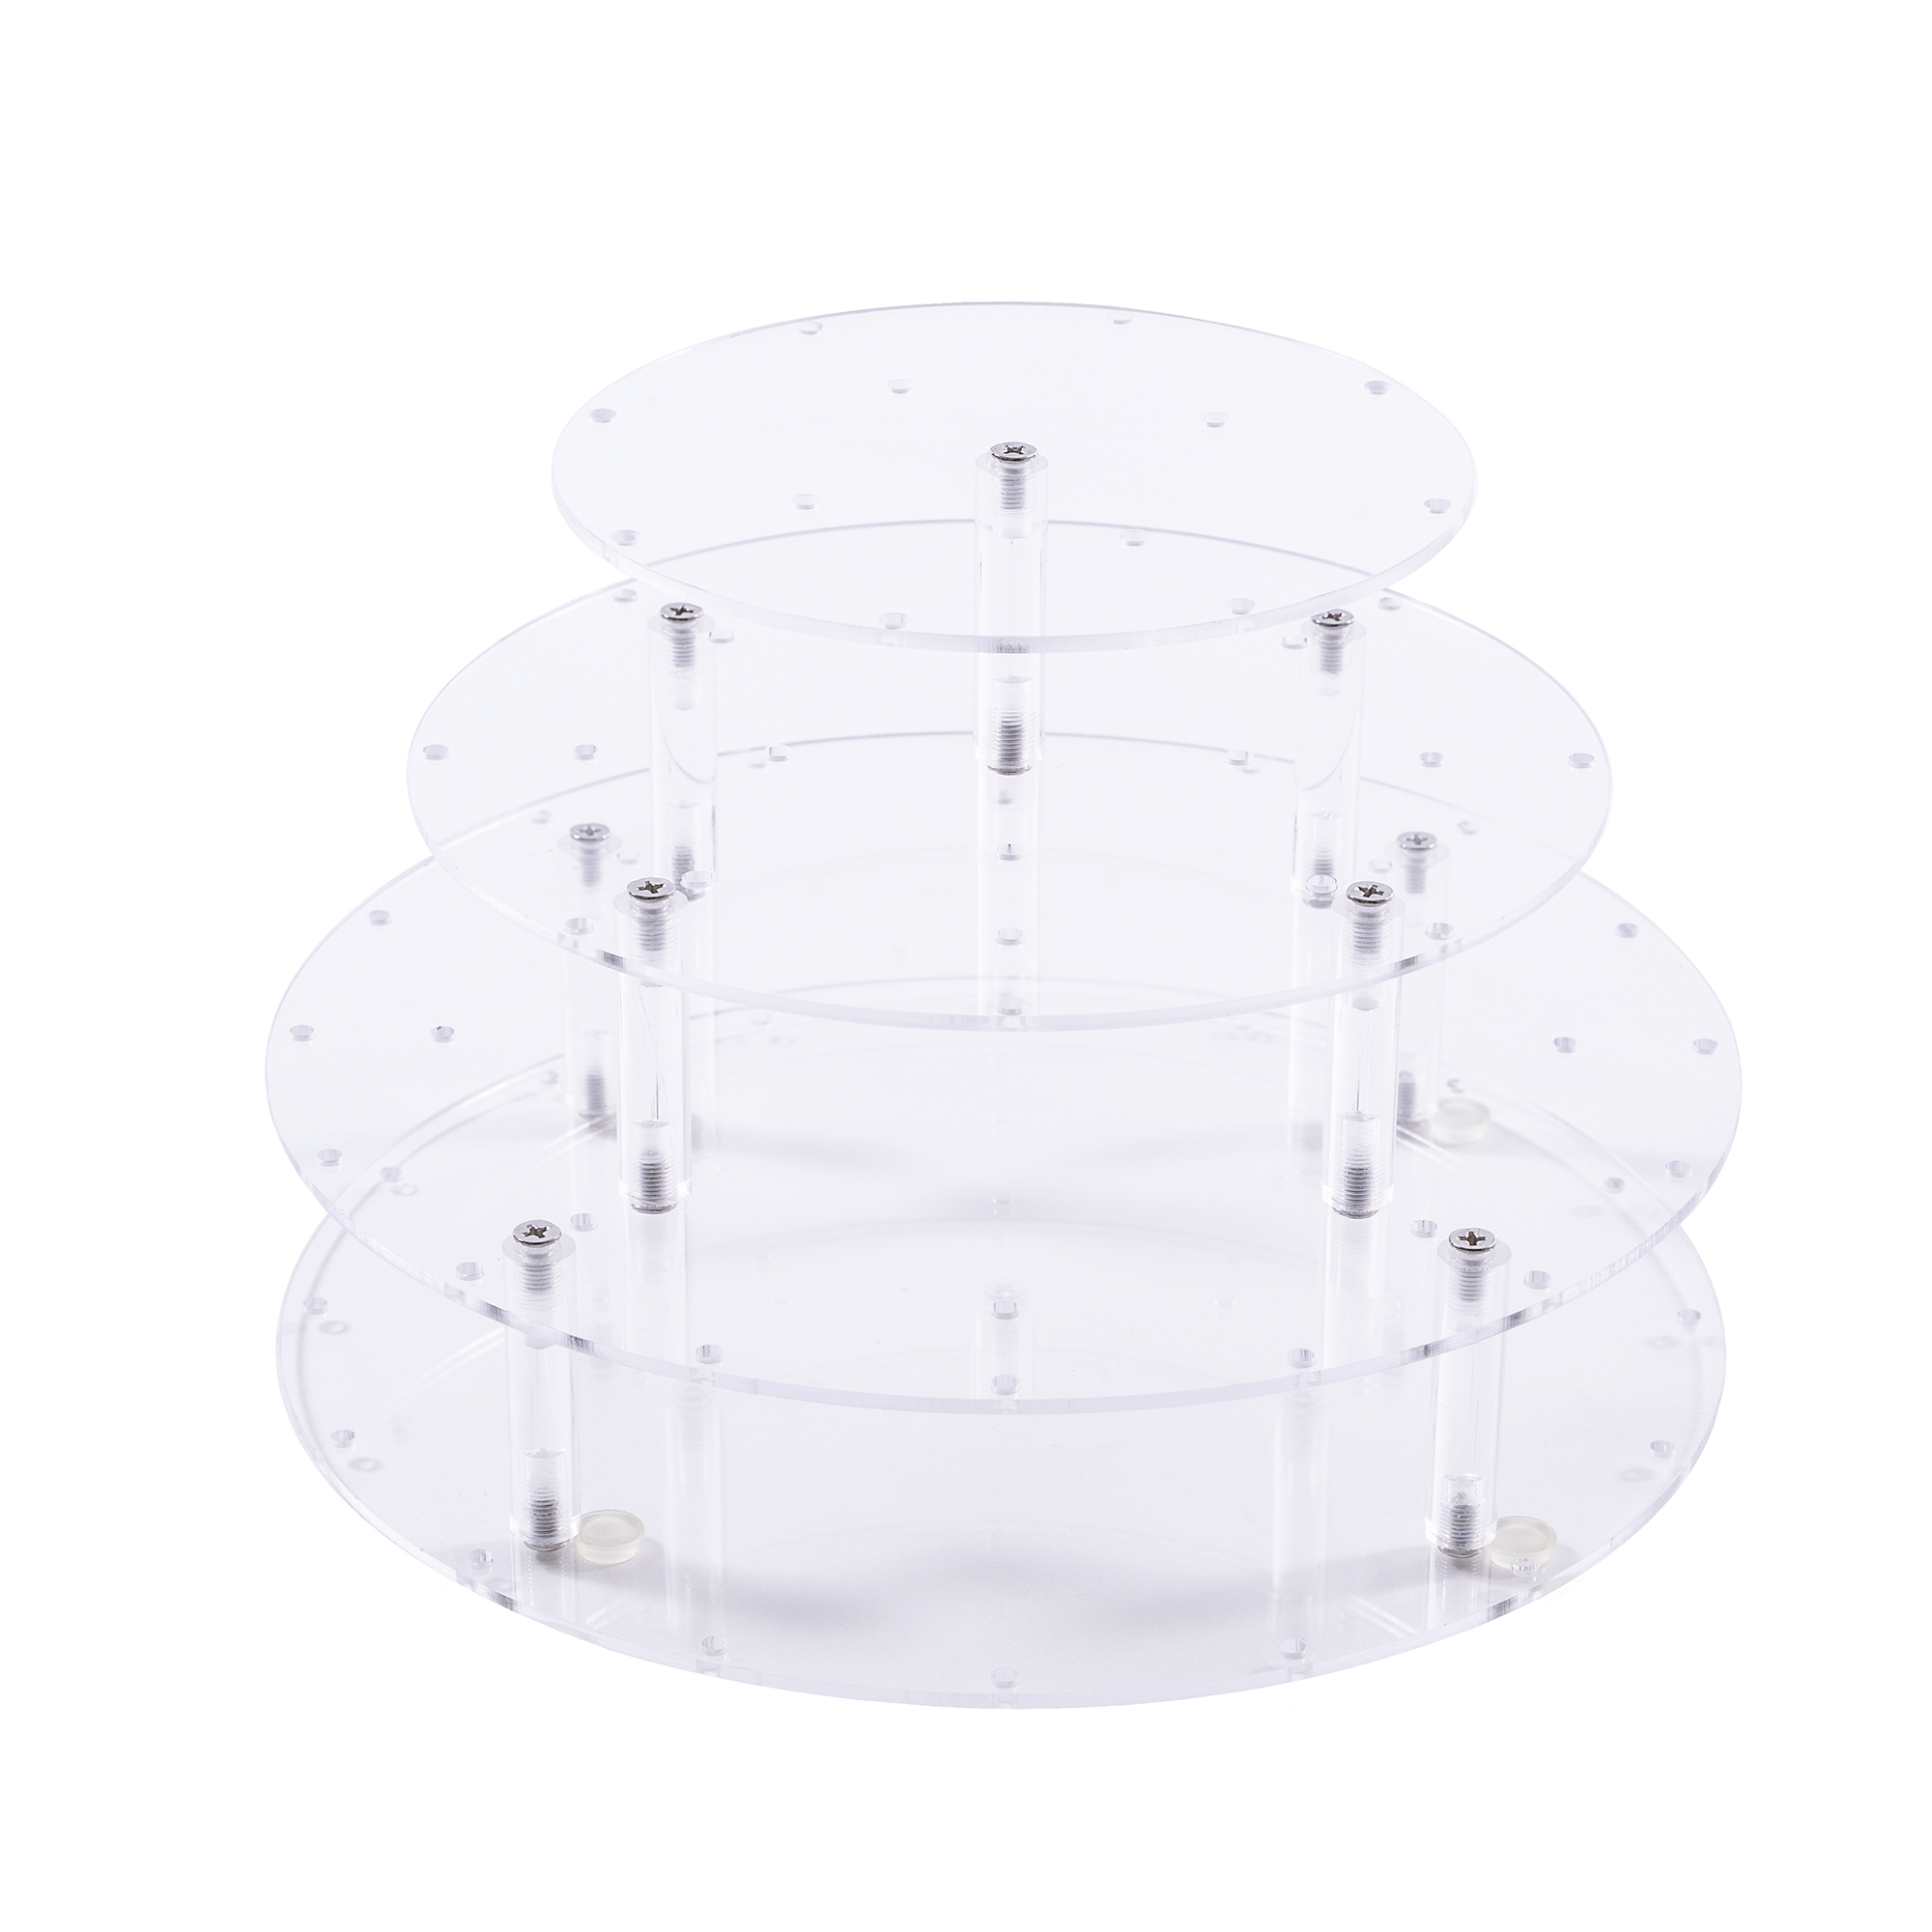 Acrylic 35 Cake Pop Stand - Clear